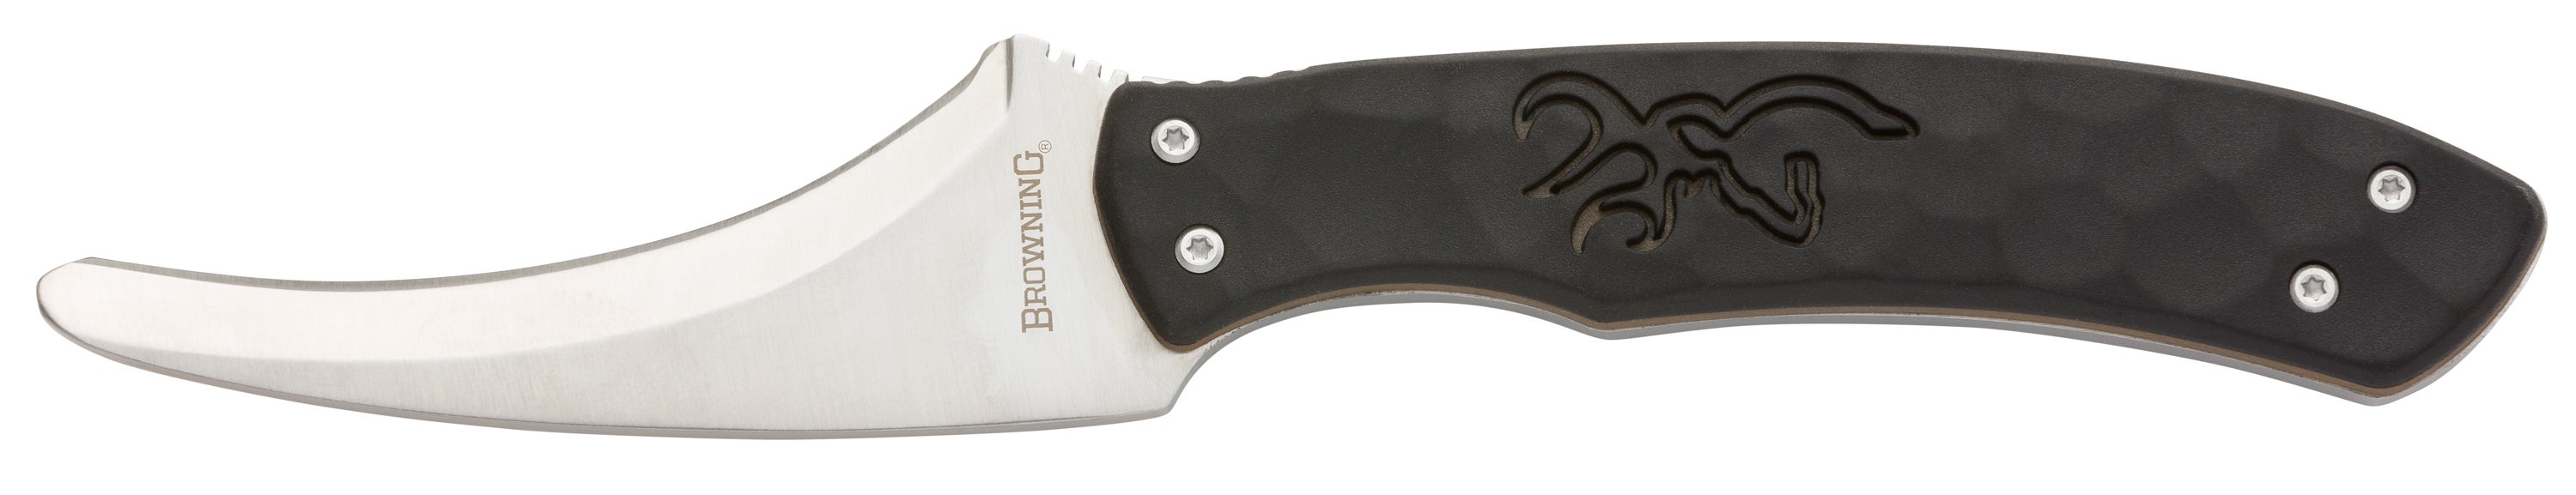 https://www.browning.com/content/dam/browning/product/knives/2021/2021-hunting/primal-combo-6-piece/Browning%20Primal%20Combo%206-Piece%20-%203220422B-04.jpg